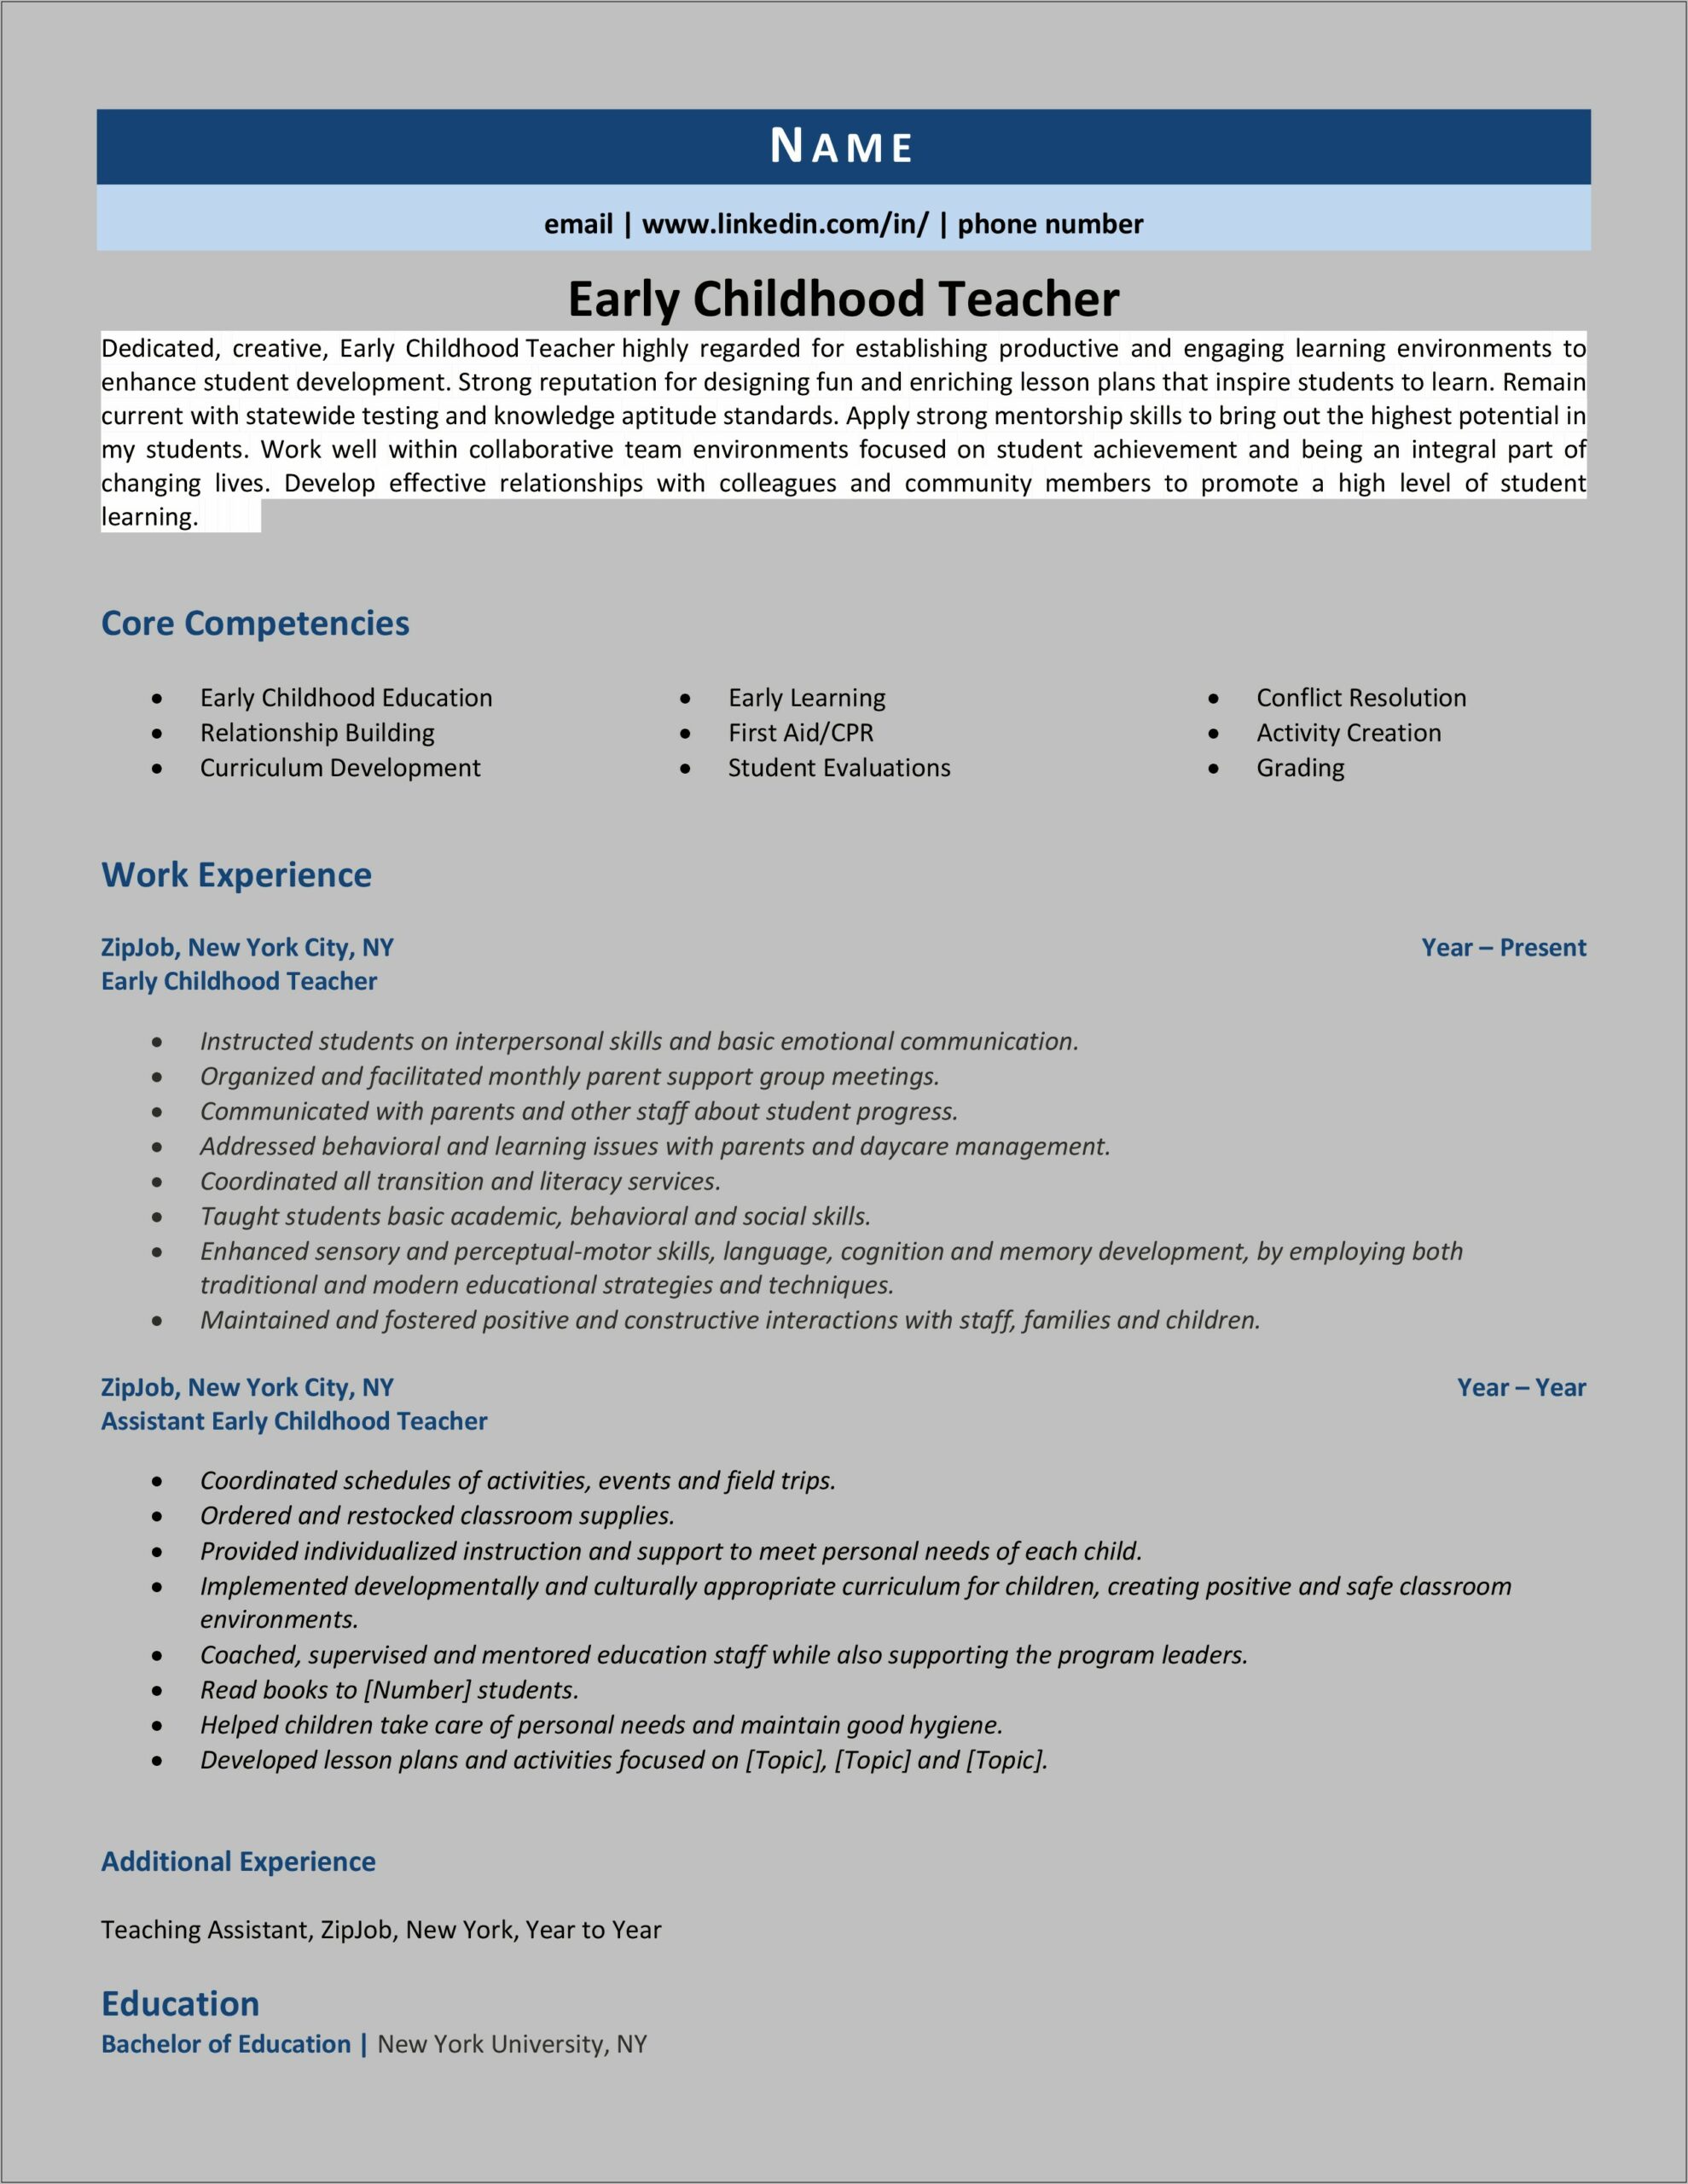 Art Teacher Resume Examples Work Experience Section